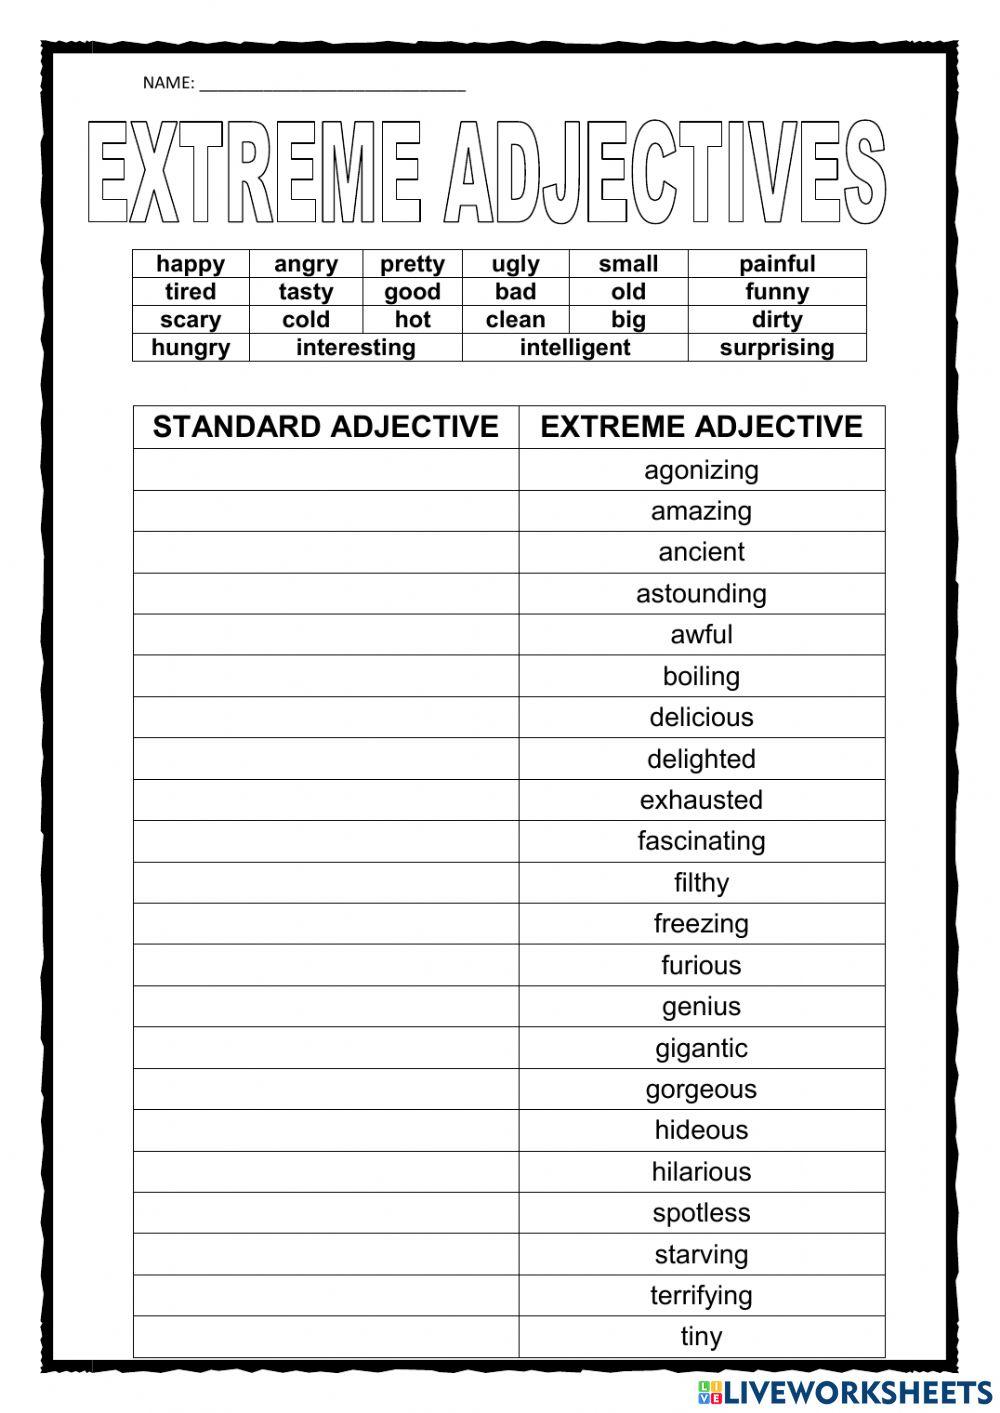 Extreme adjectives